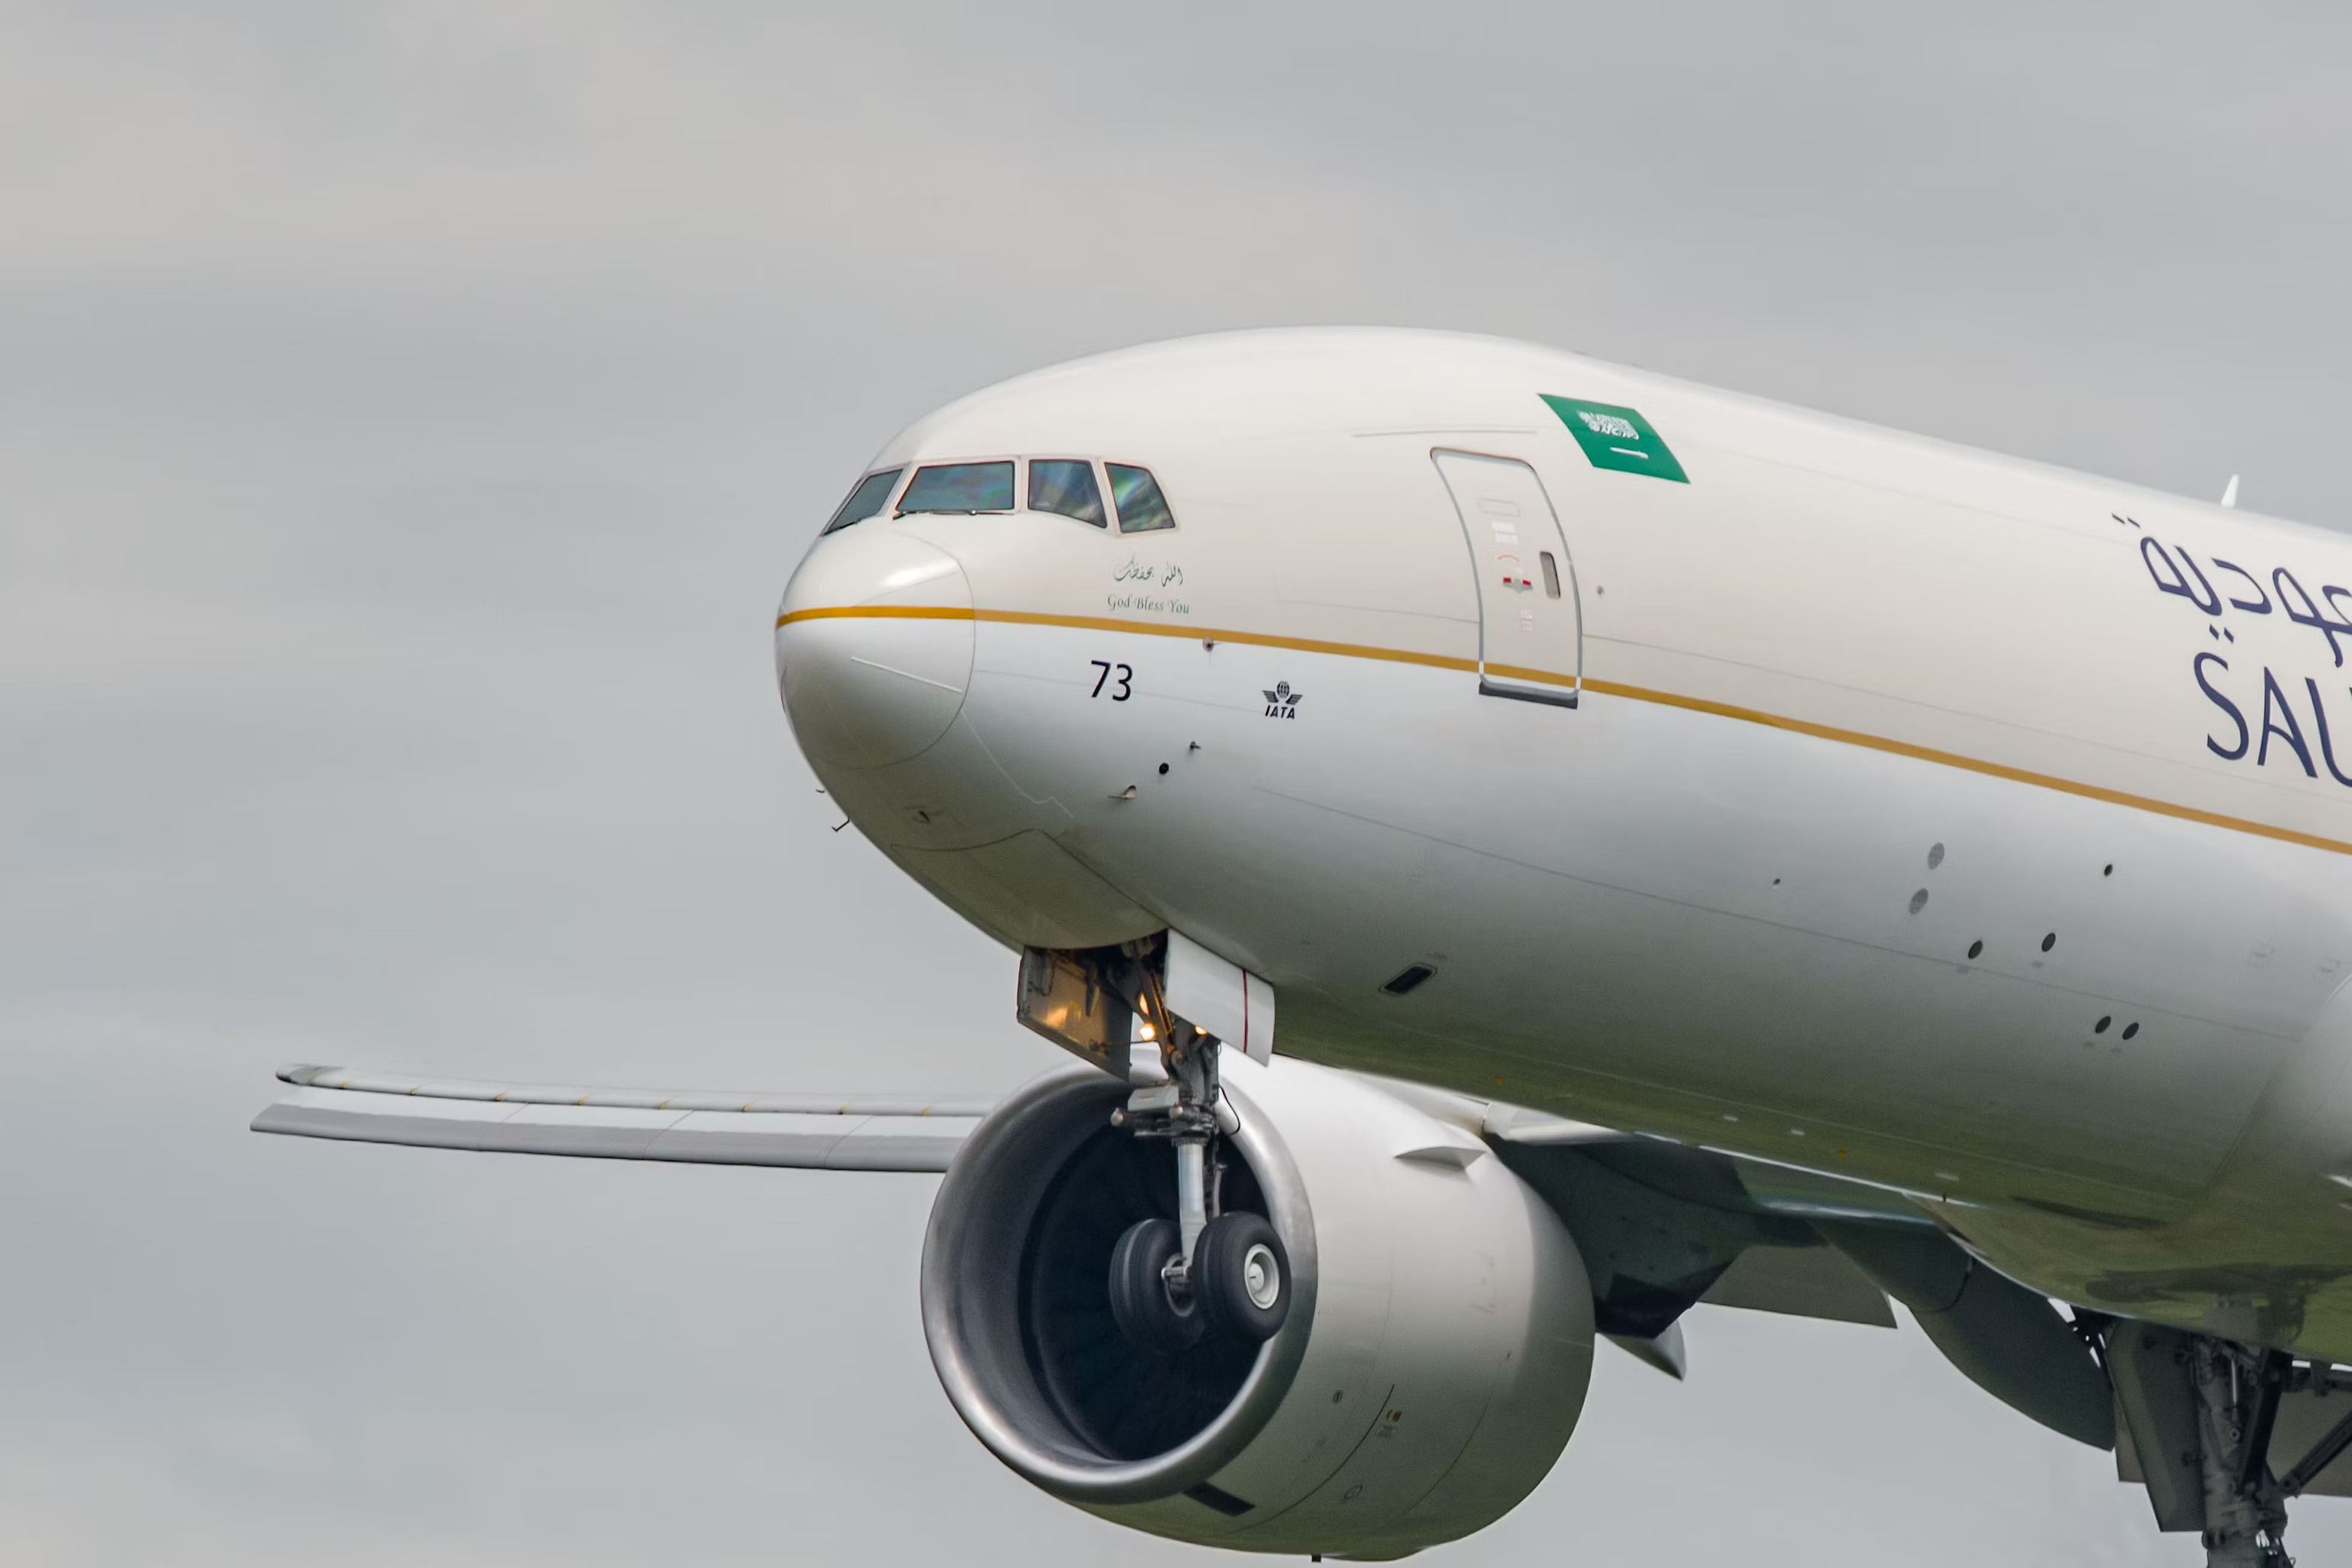 A Saudia Cargo Boeing 777F Flying in the sky.